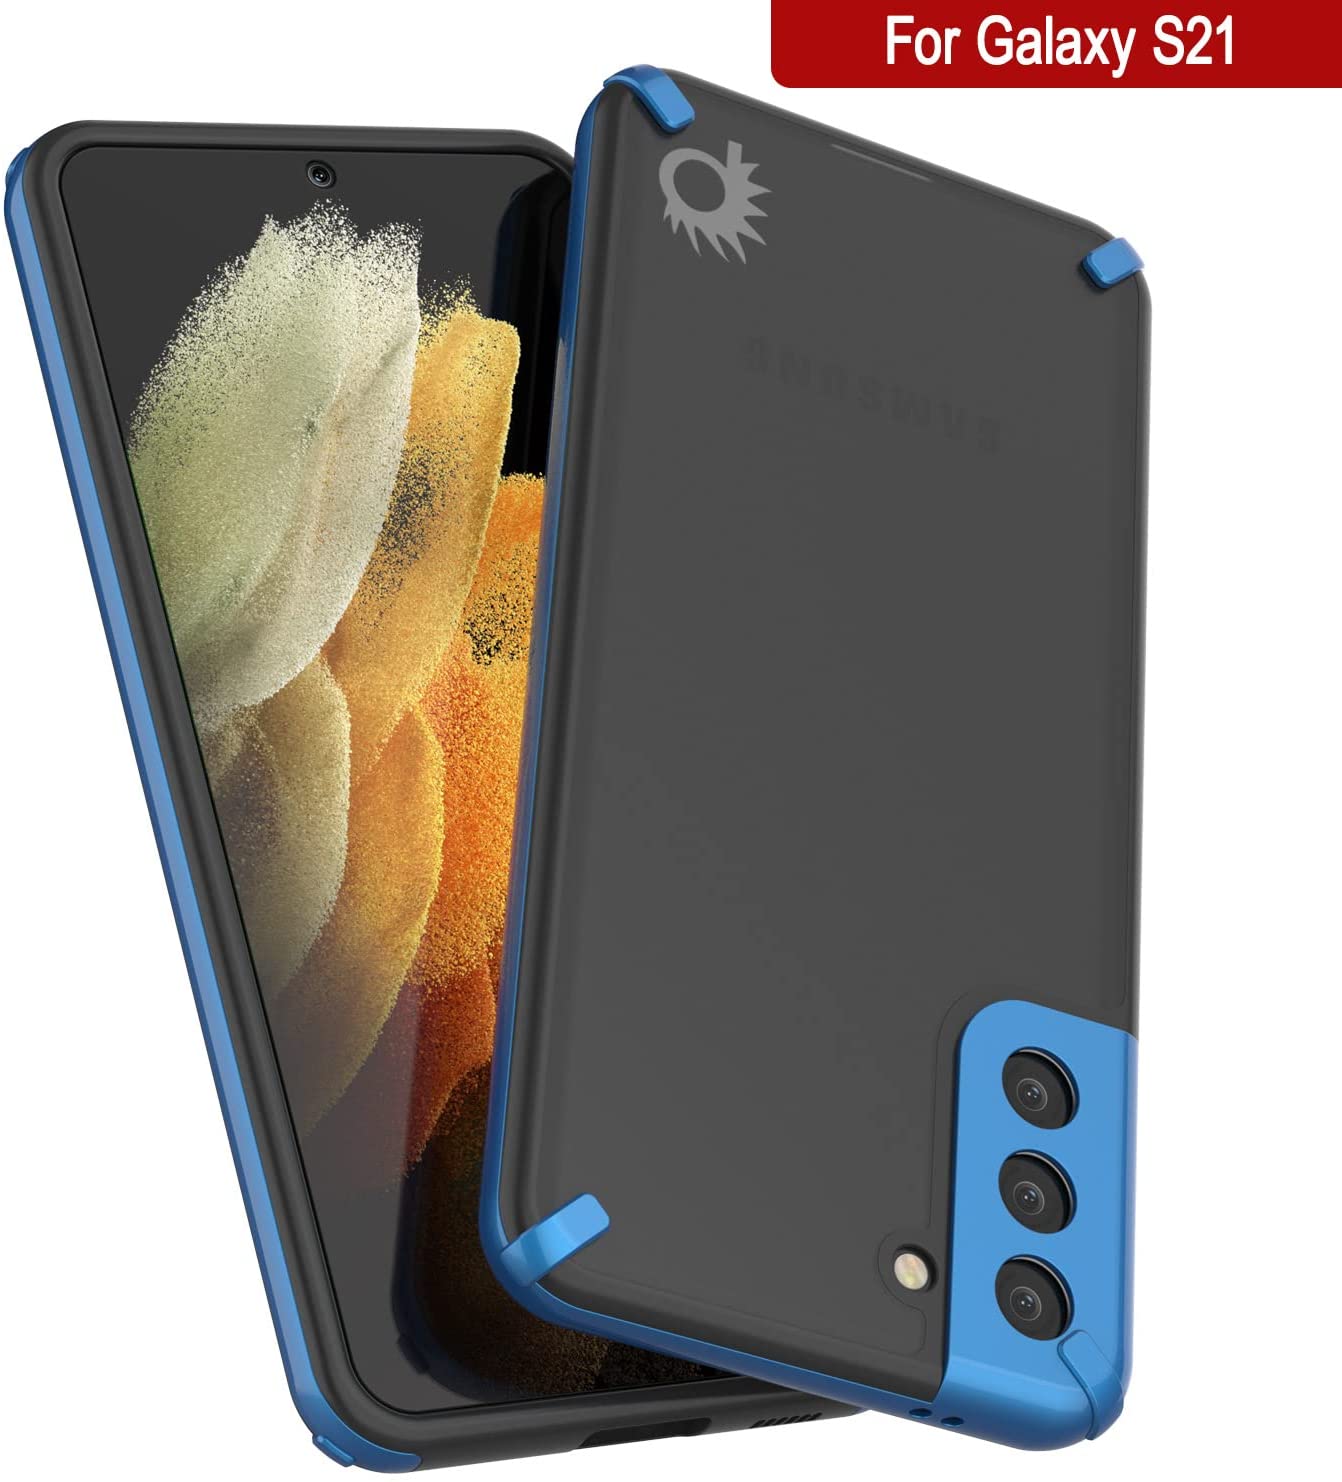 Punkcase Galaxy S21 Case [Mirage Series] Heavy Duty Phone Cover (Blue)